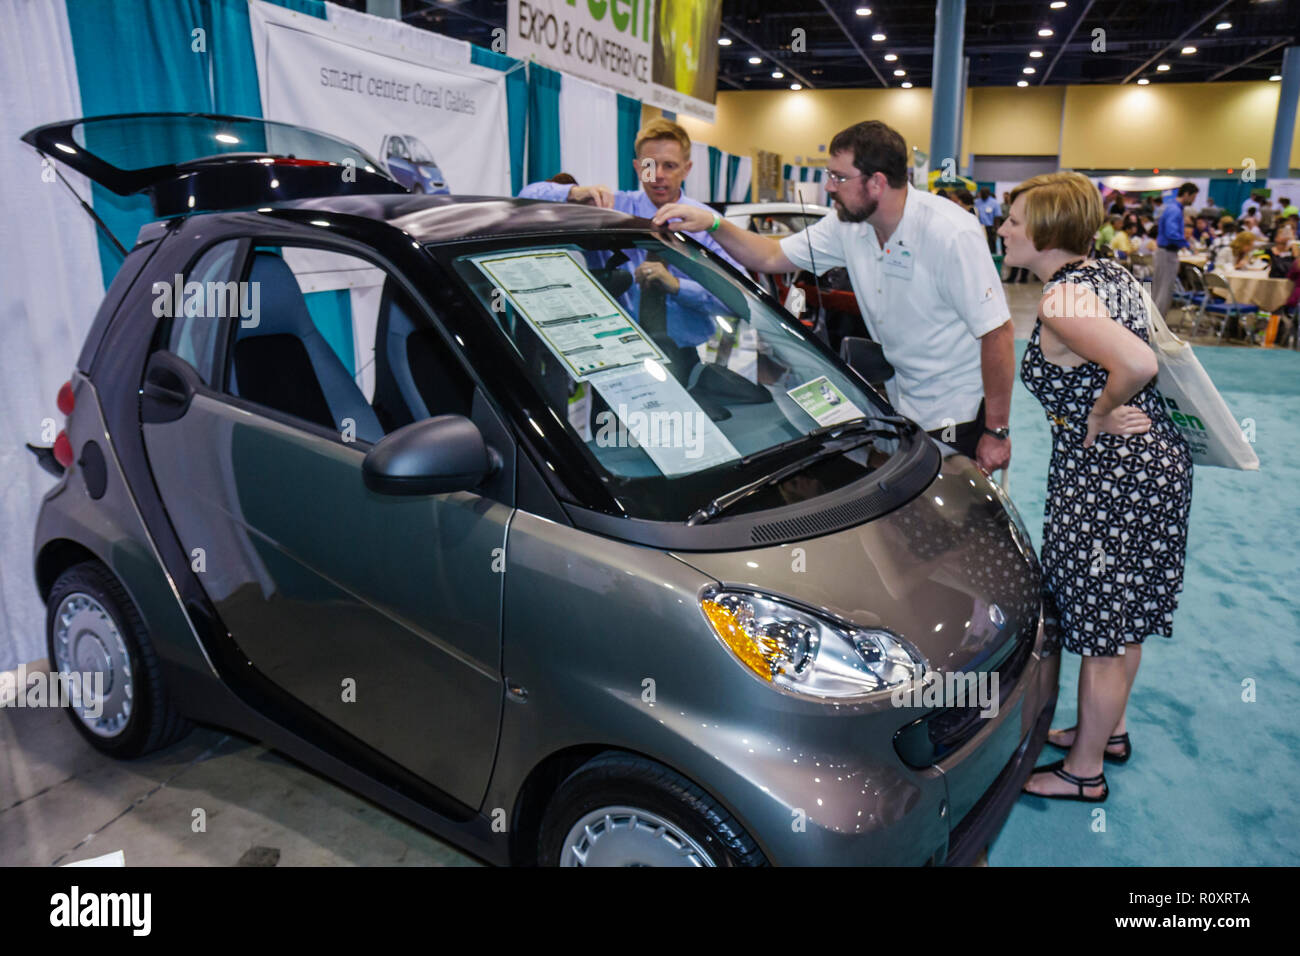 Miami Beach Florida,Convention Center,centre,MiaGreen Expo & Conference,green trade show,energy,fuel efficient,exhibitor,global warming climate change Stock Photo